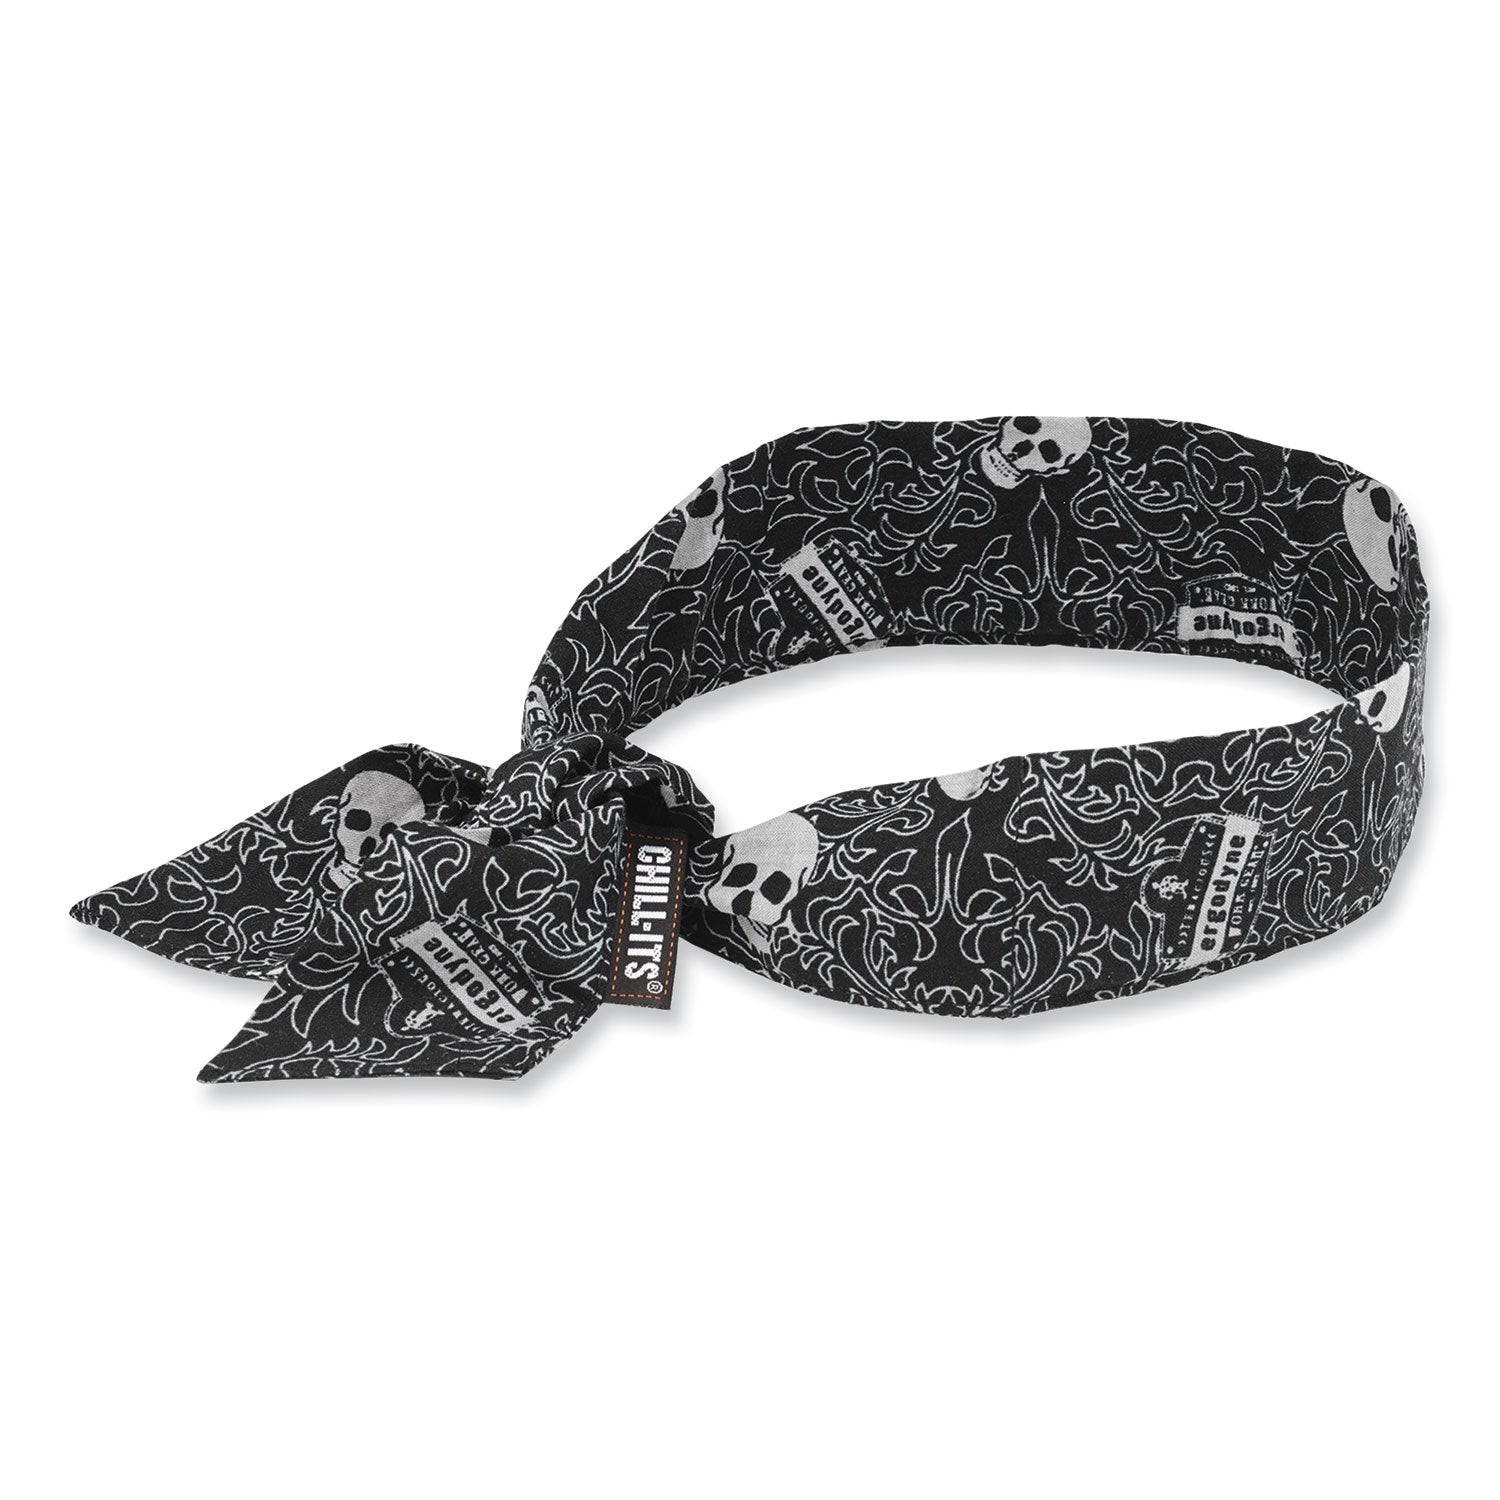 chill-its-6700-cooling-bandana-polymer-tie-headband-one-size-fits-most-skulls-ships-in-1-3-business-days_ego12329 - 1